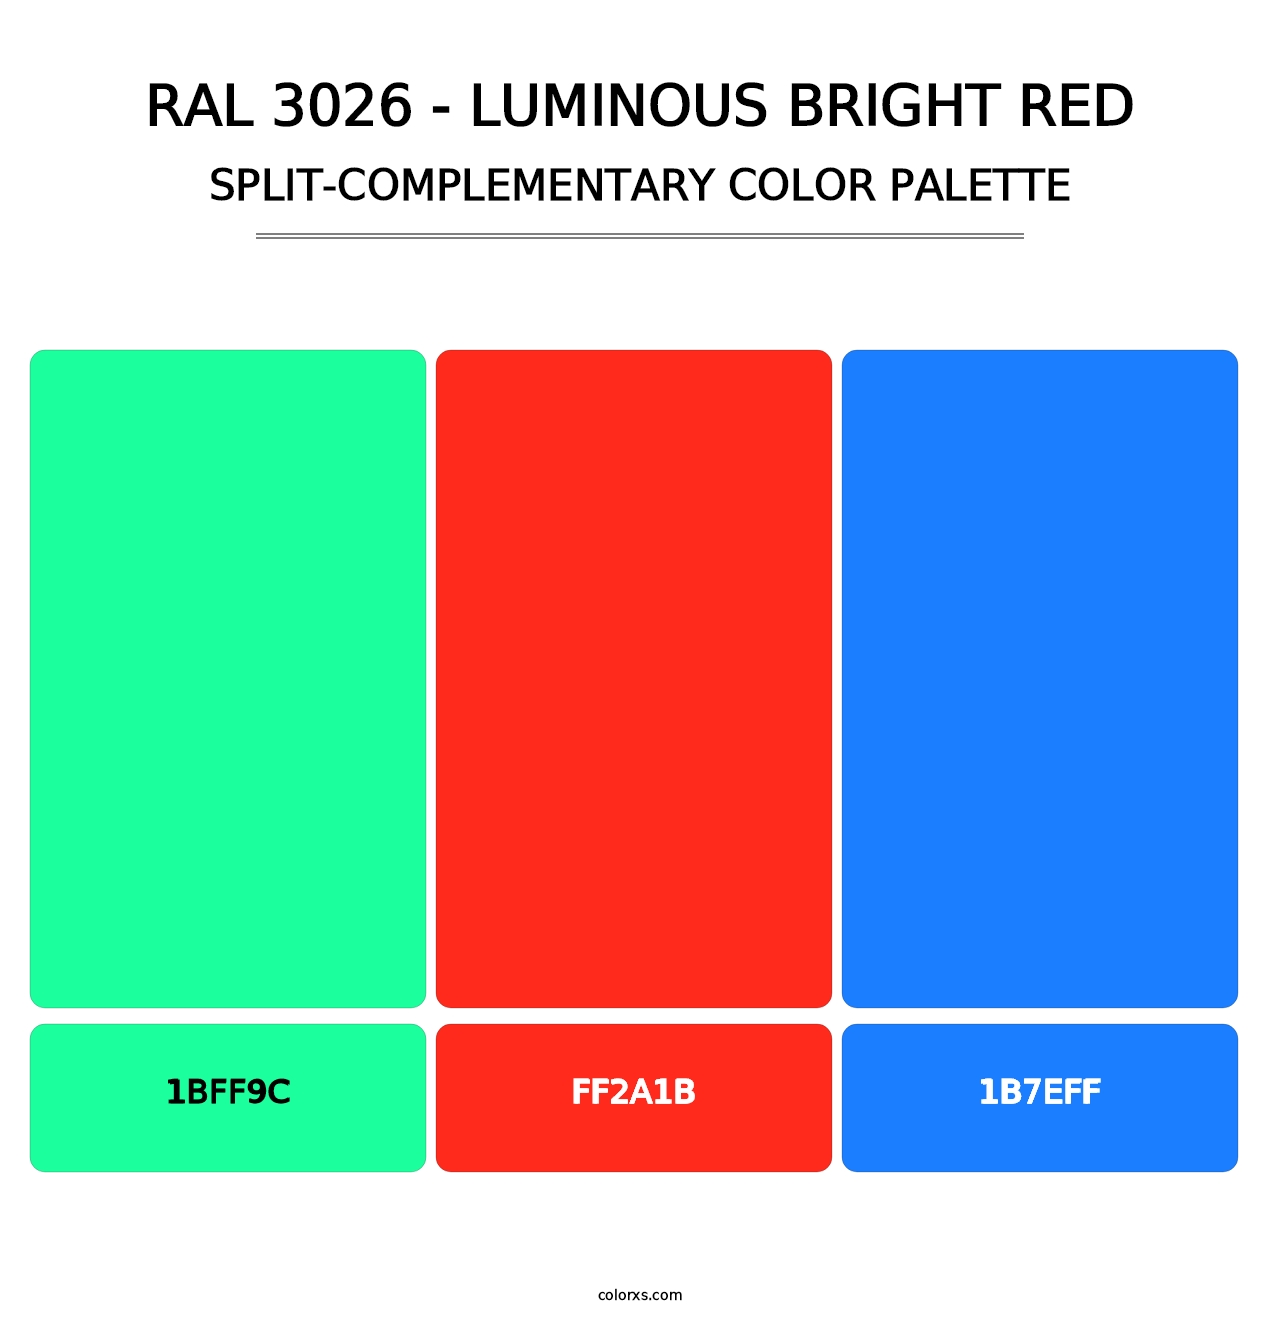 RAL 3026 - Luminous Bright Red - Split-Complementary Color Palette